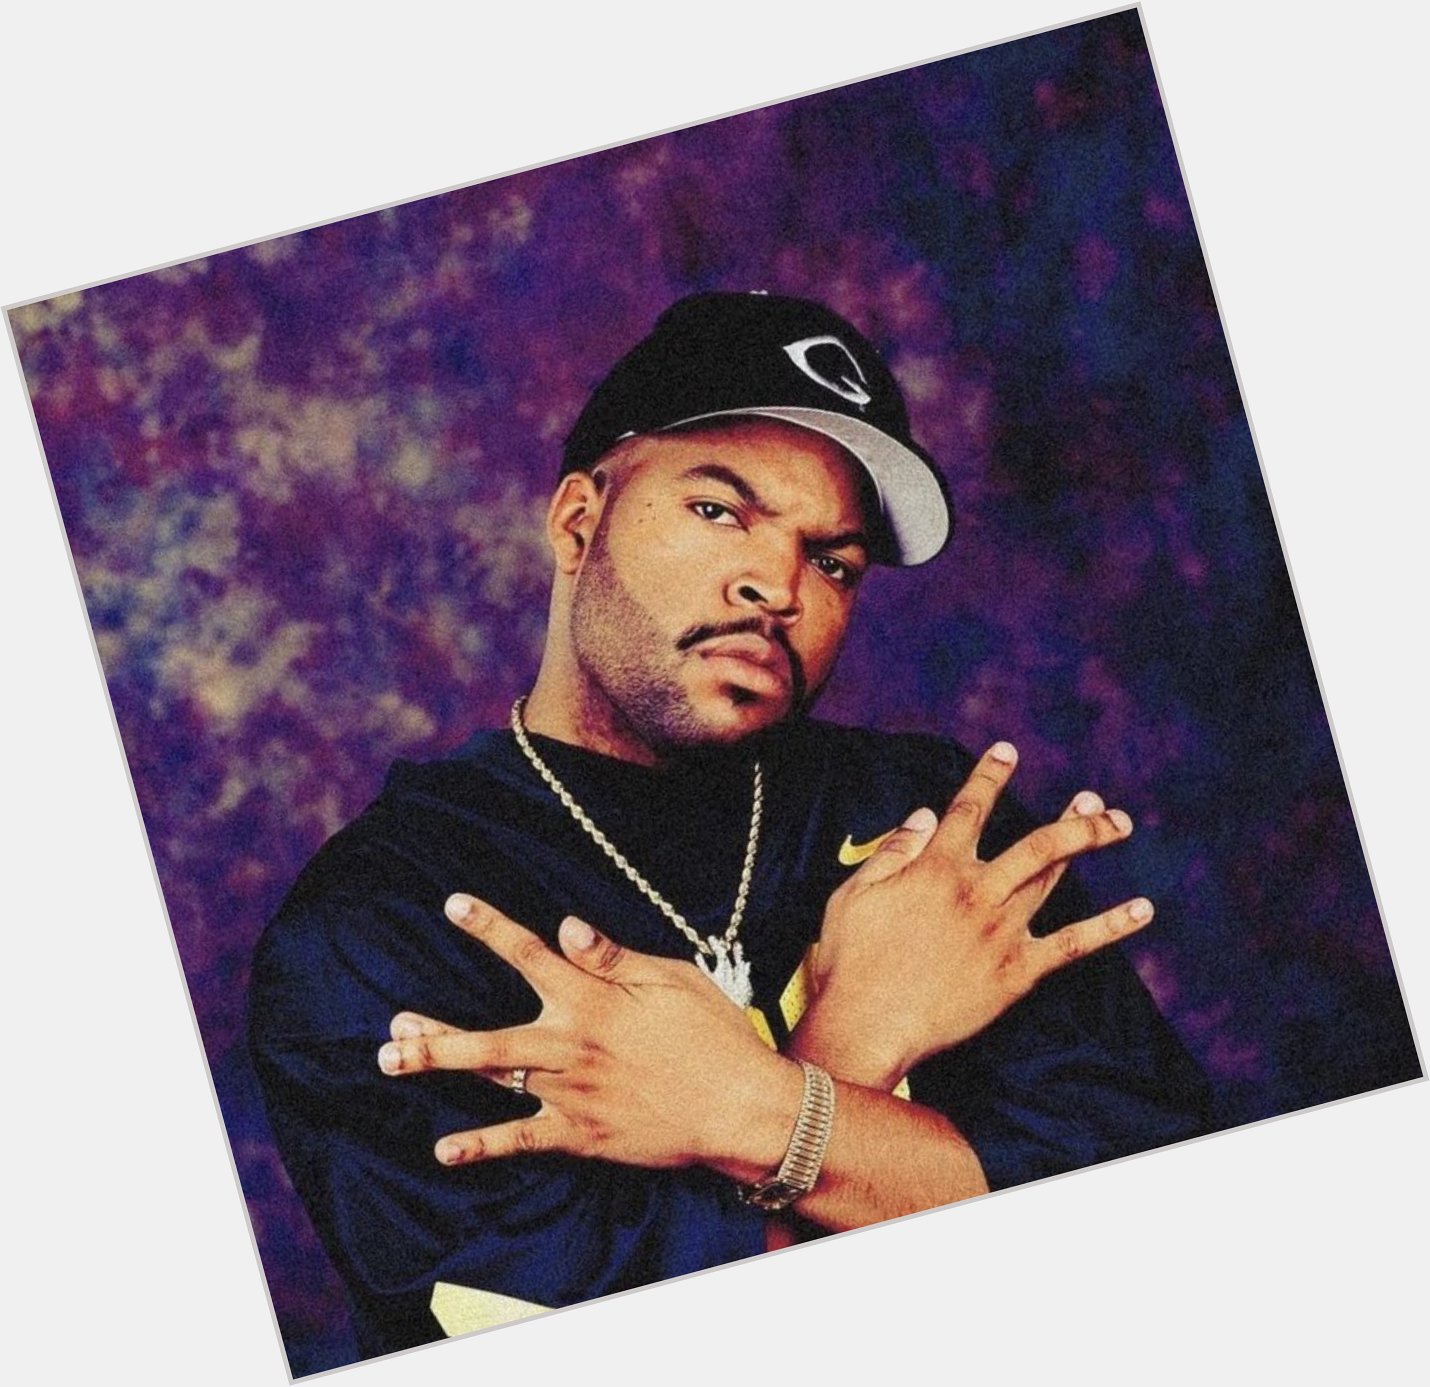 Ice Cube turned 54 today Happy Birthday to Ice Cube 